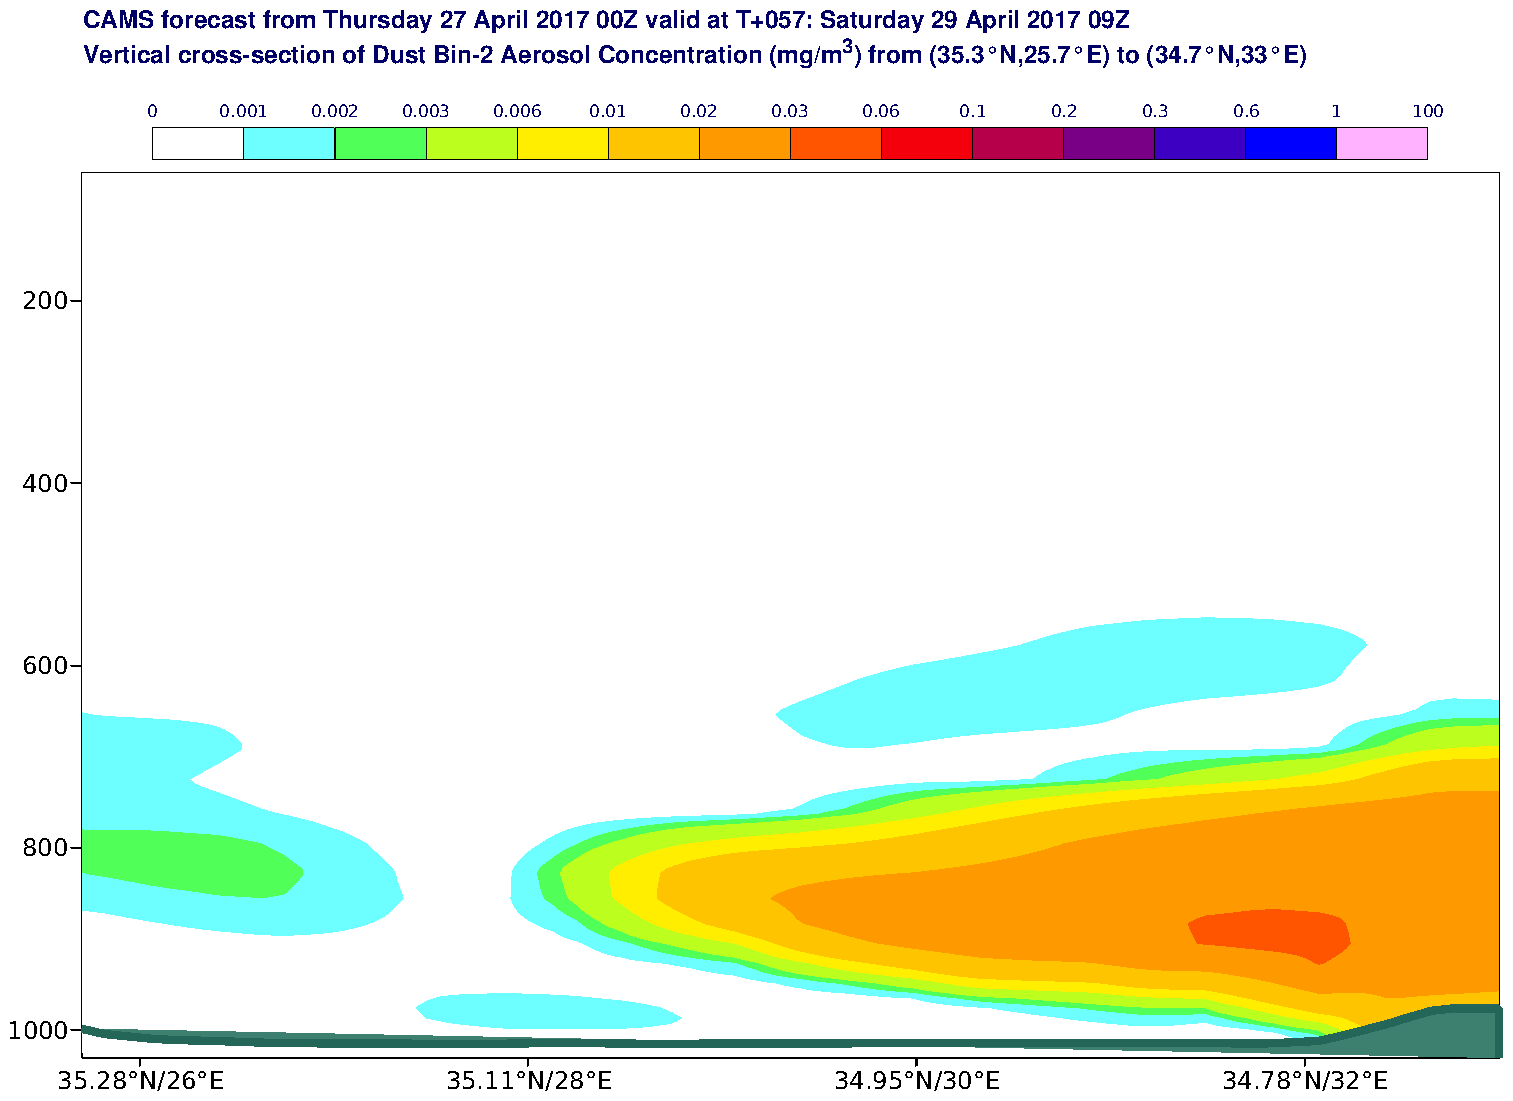 Vertical cross-section of Dust Bin-2 Aerosol Concentration (mg/m3) valid at T57 - 2017-04-29 09:00